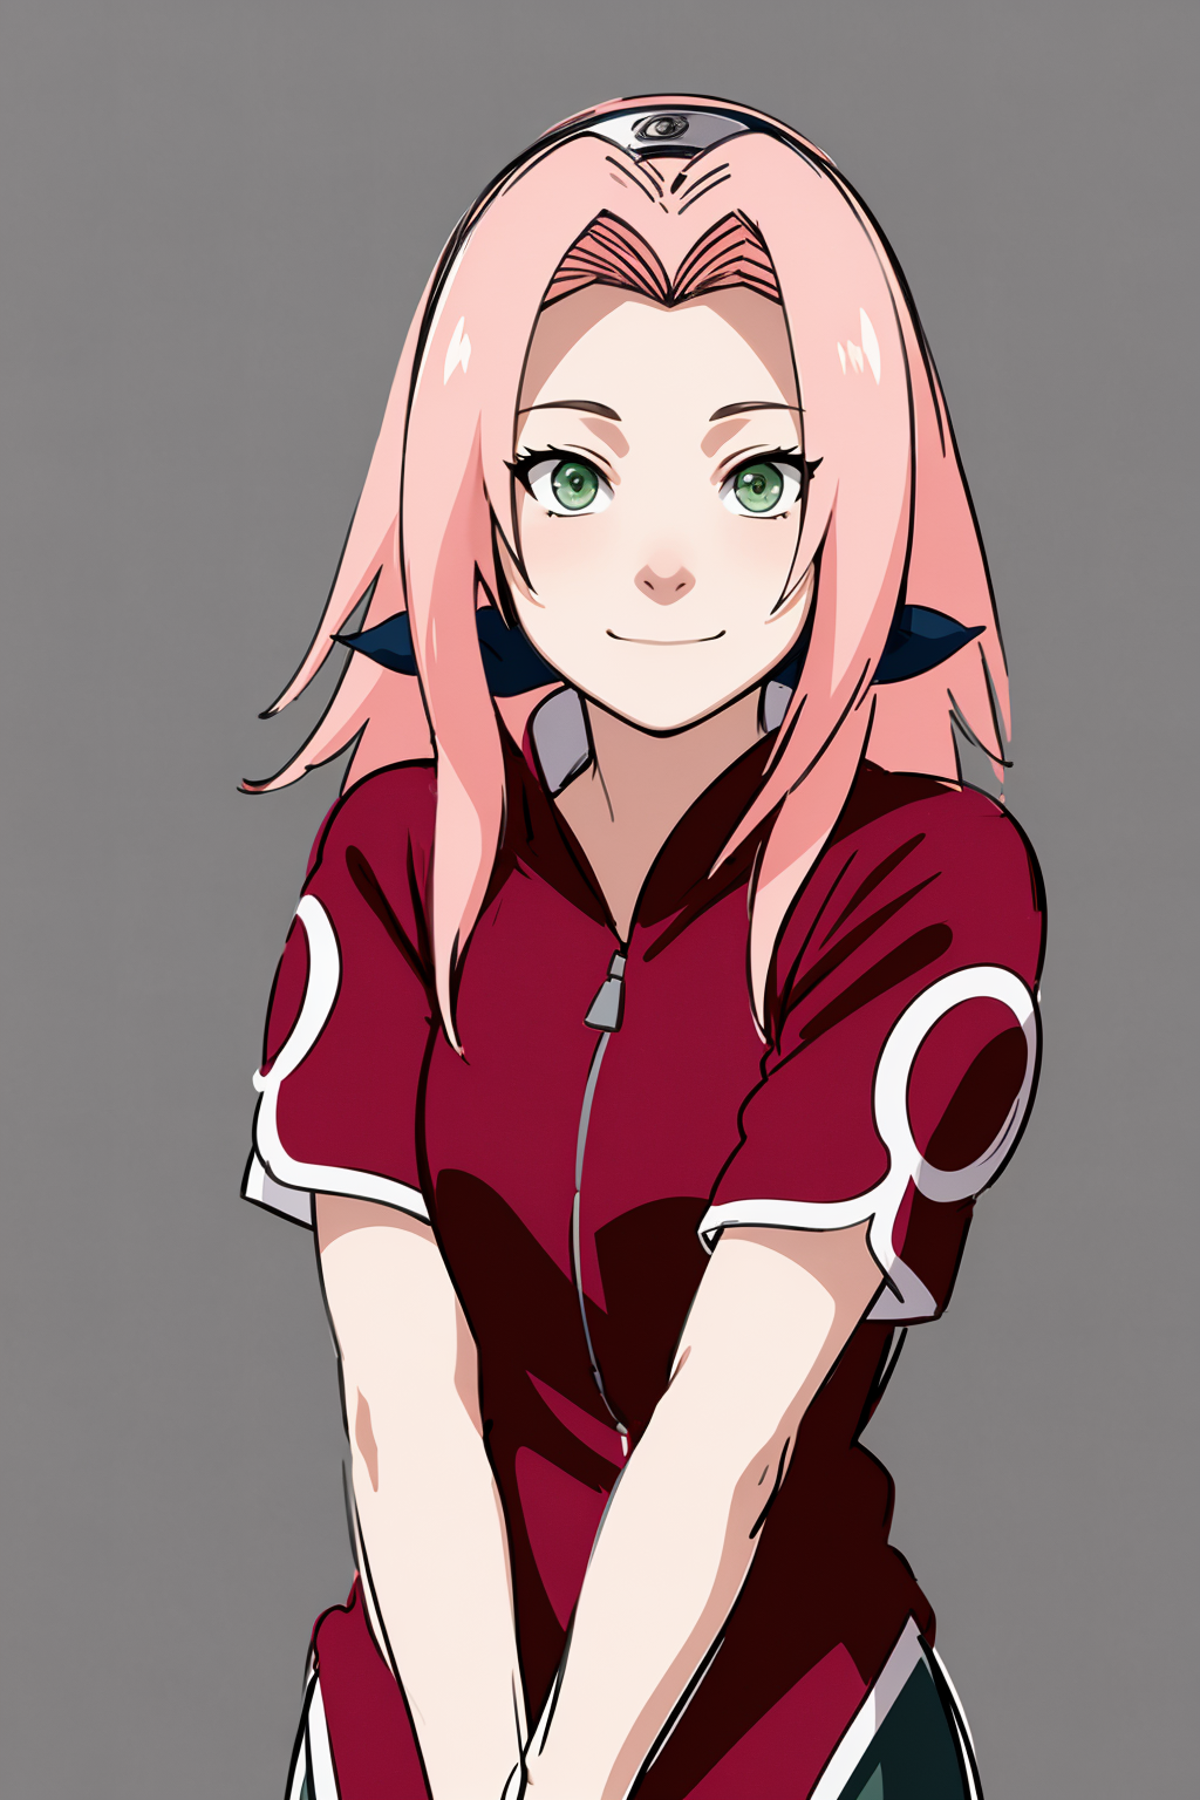 A cartoonish anime girl with pink hair and a red shirt.